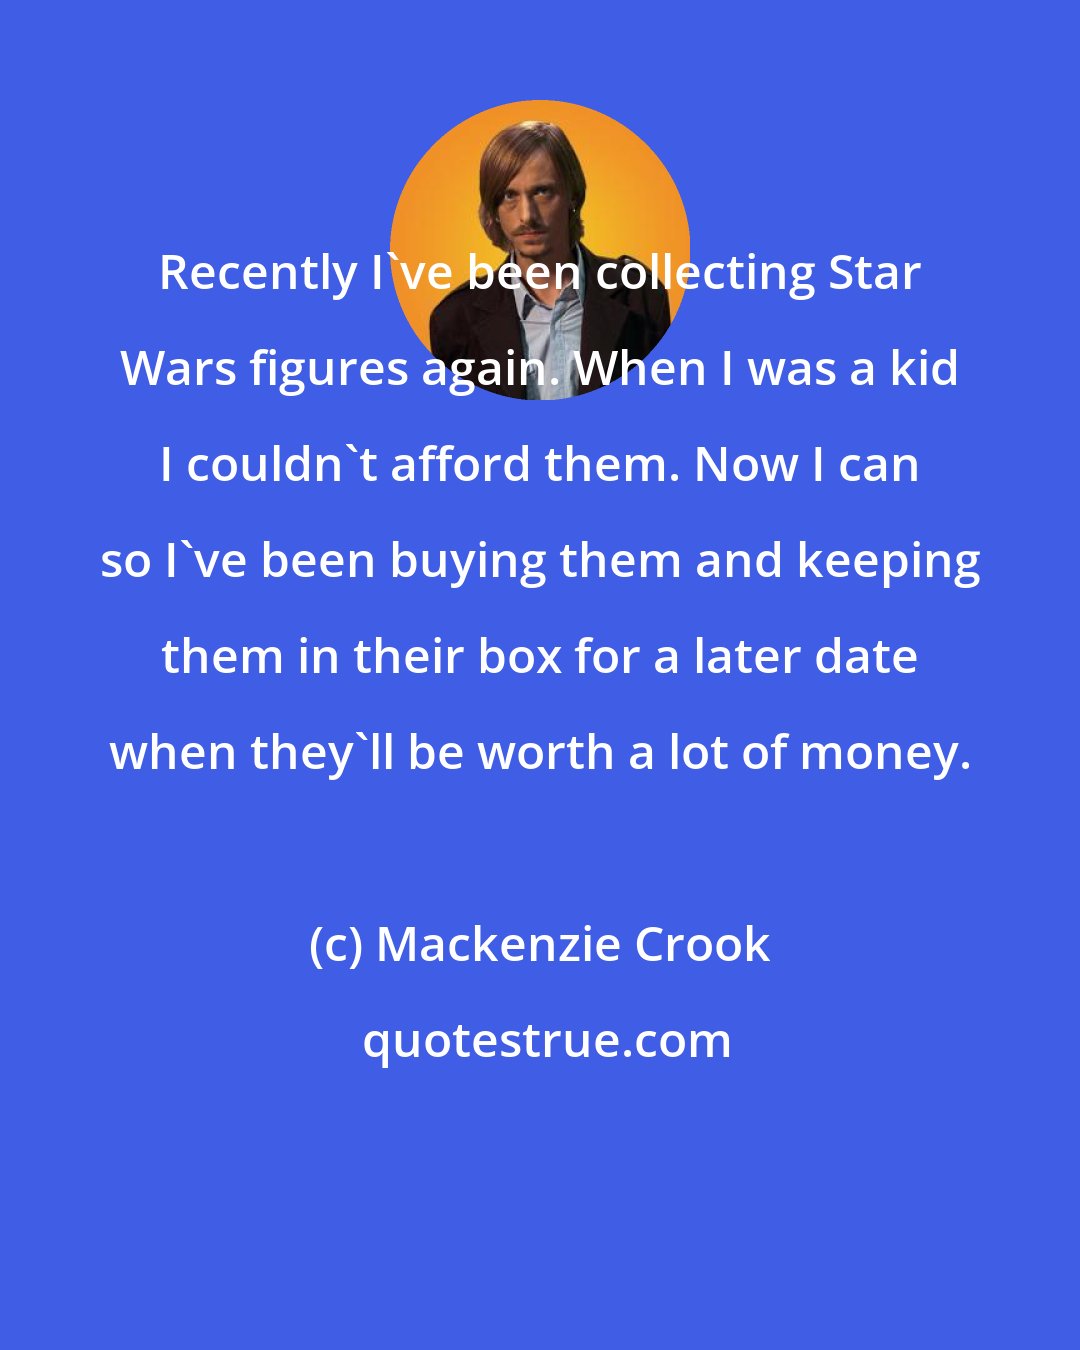 Mackenzie Crook: Recently I've been collecting Star Wars figures again. When I was a kid I couldn't afford them. Now I can so I've been buying them and keeping them in their box for a later date when they'll be worth a lot of money.